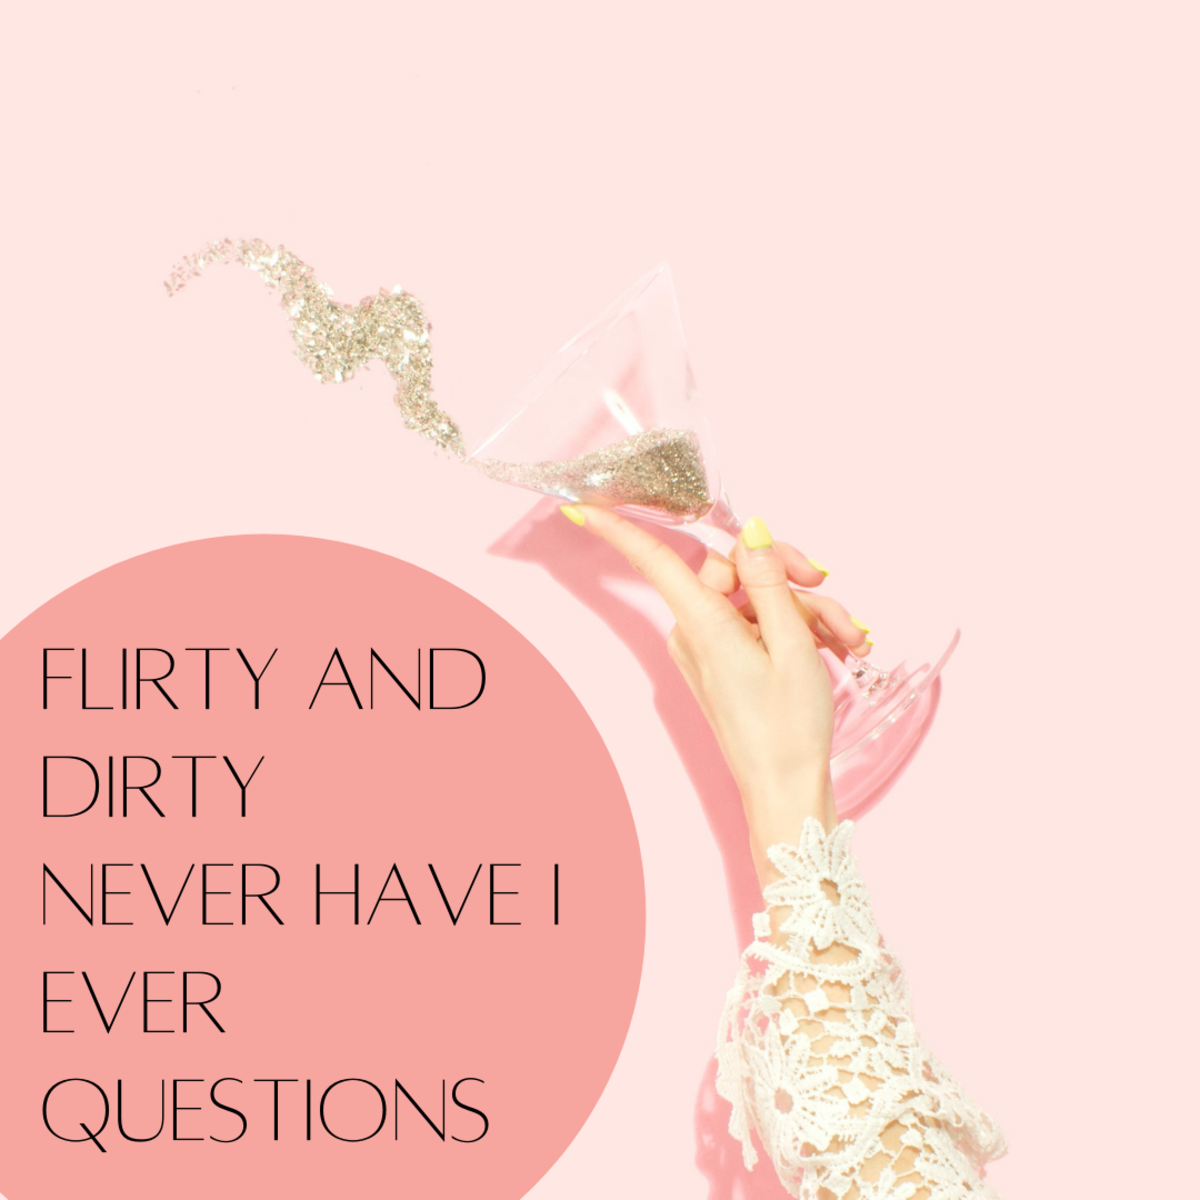 Looking to spice things up? Here are some dirty questions to heat up your game of "Never Have I Ever."